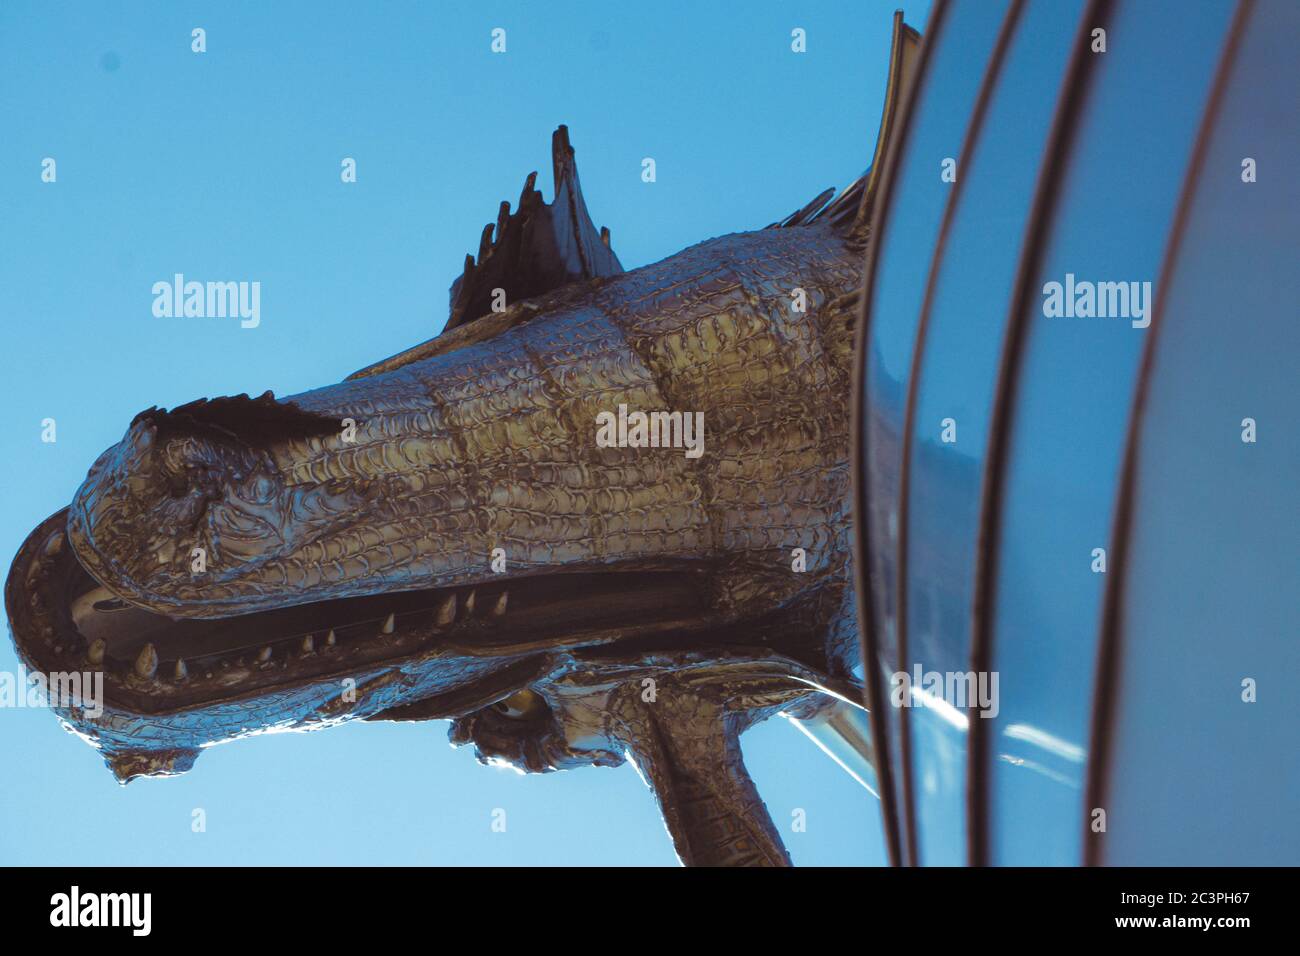 Low angle shot of the metal statue of a dragon captured under the blue sky Stock Photo